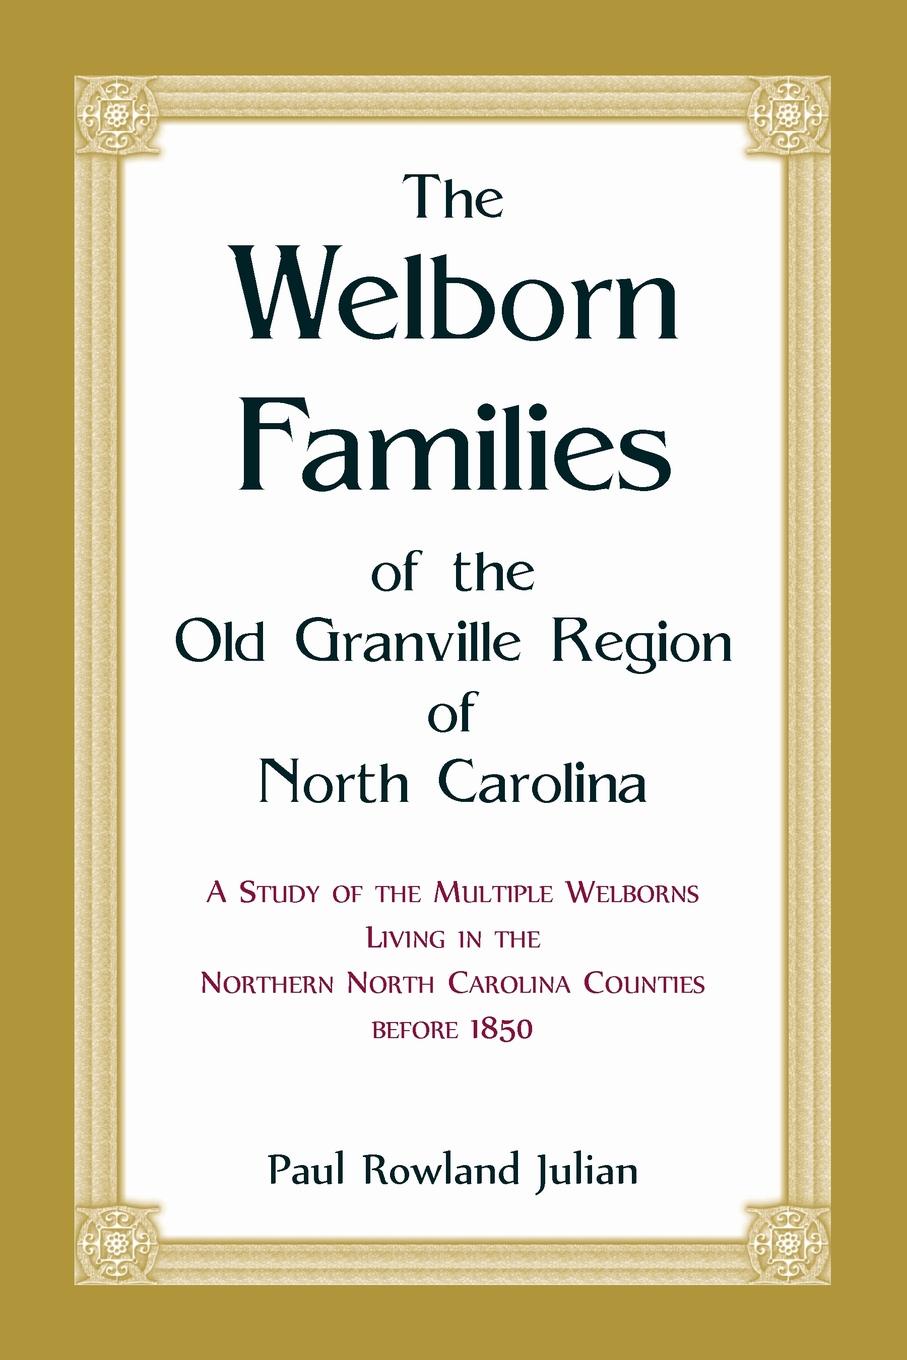 The Welborn Families of the Old Granville Region of North Carolina. A Study of the Multiple Welborns living in the Northern North Carolina Counties before 1850